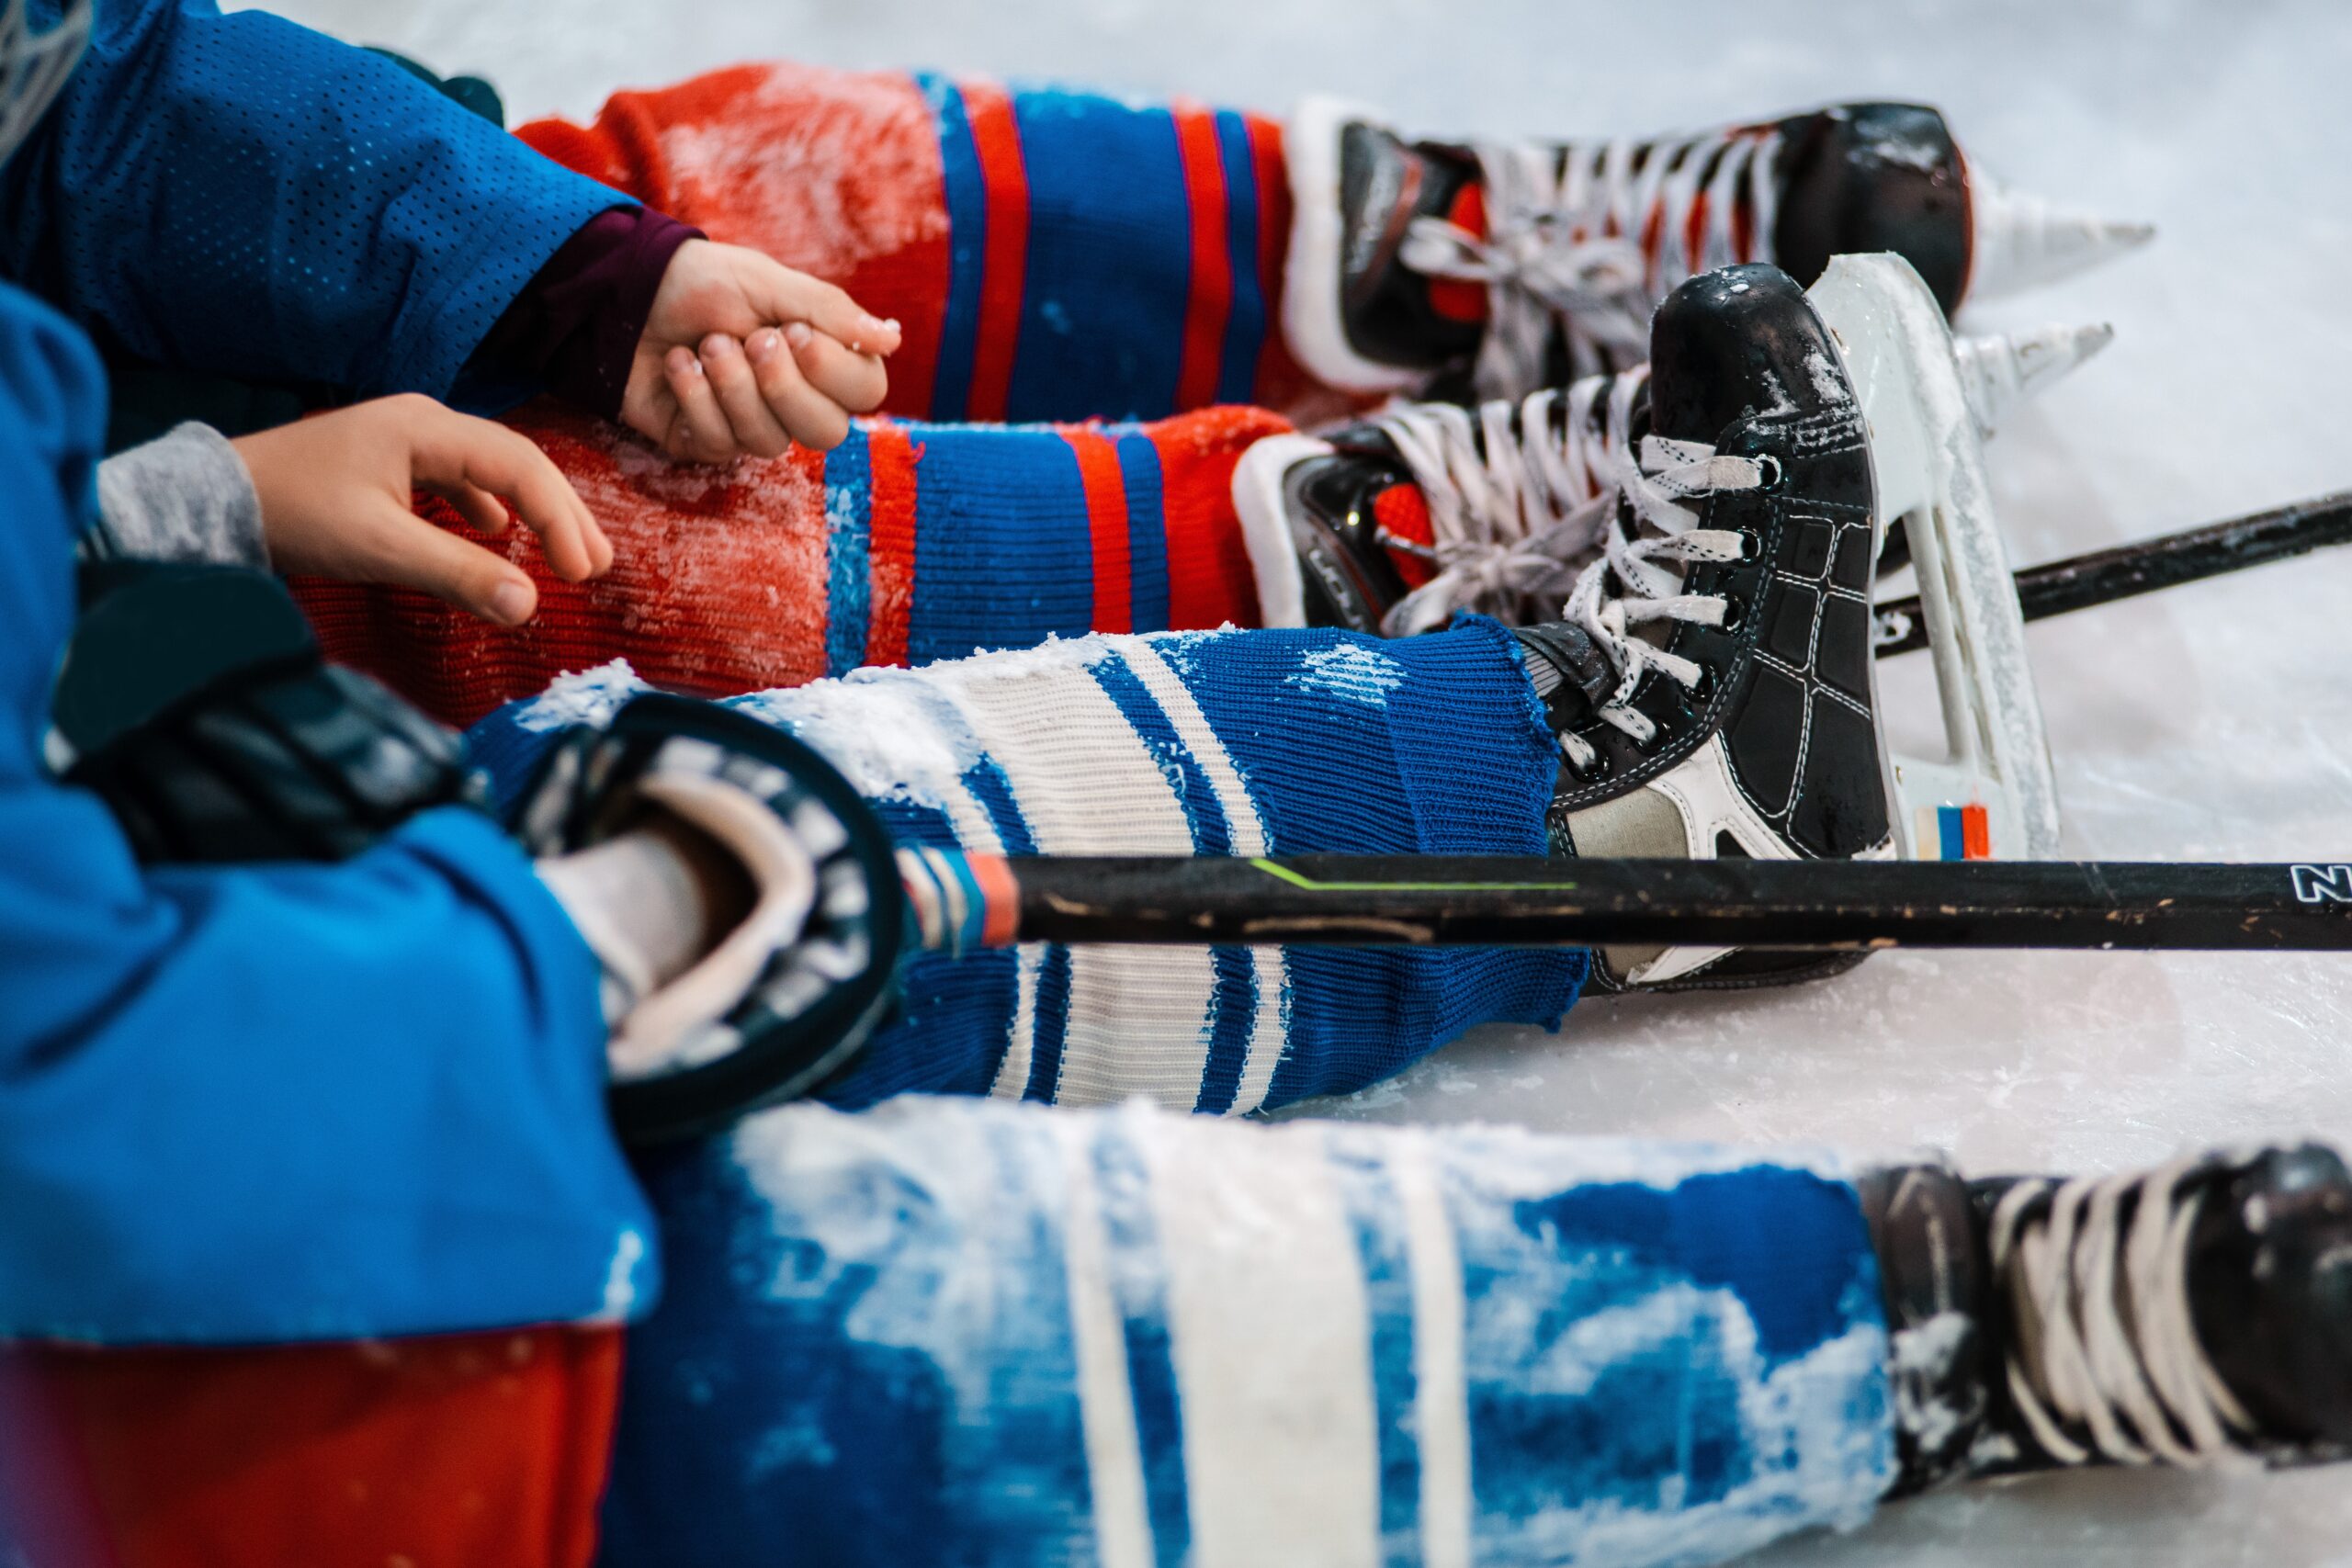 Six-year-old children hockey players sit on the ice in skates at the rink.